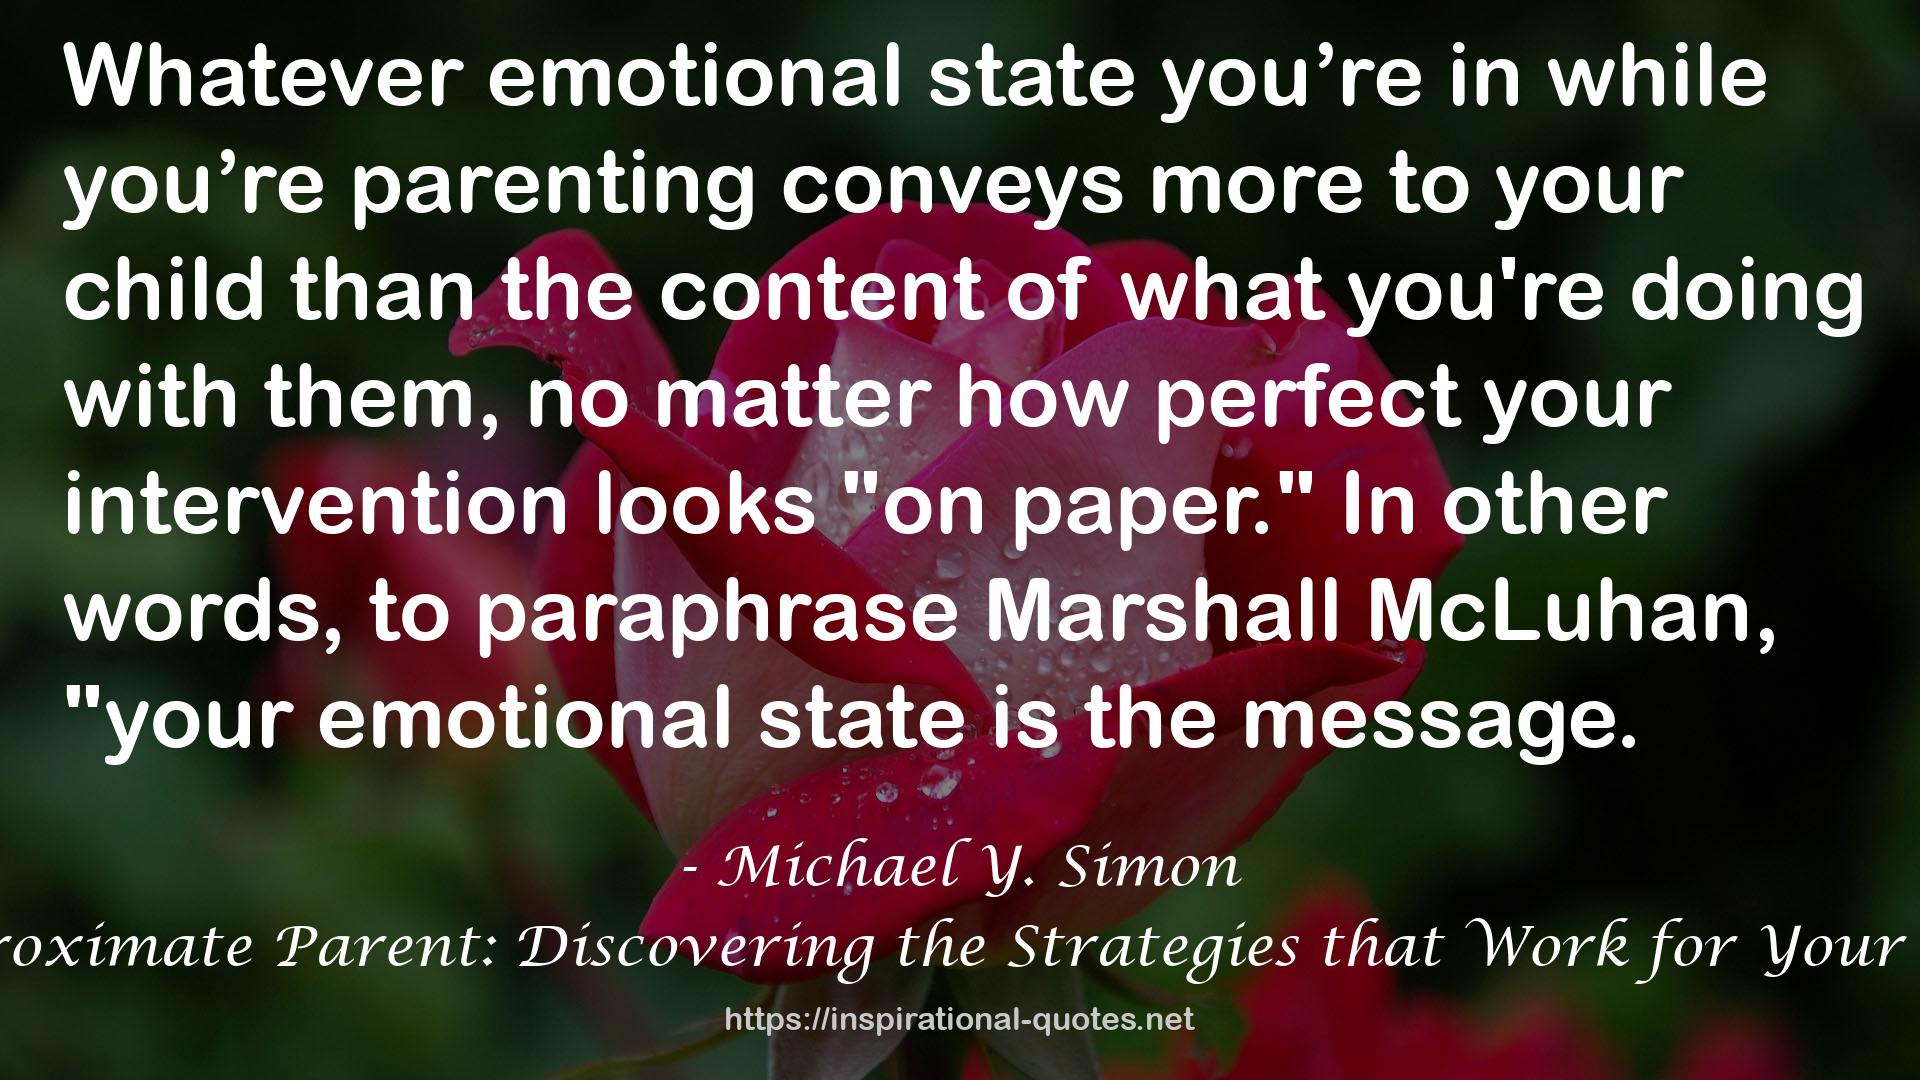 The Approximate Parent: Discovering the Strategies that Work for Your Teenager QUOTES